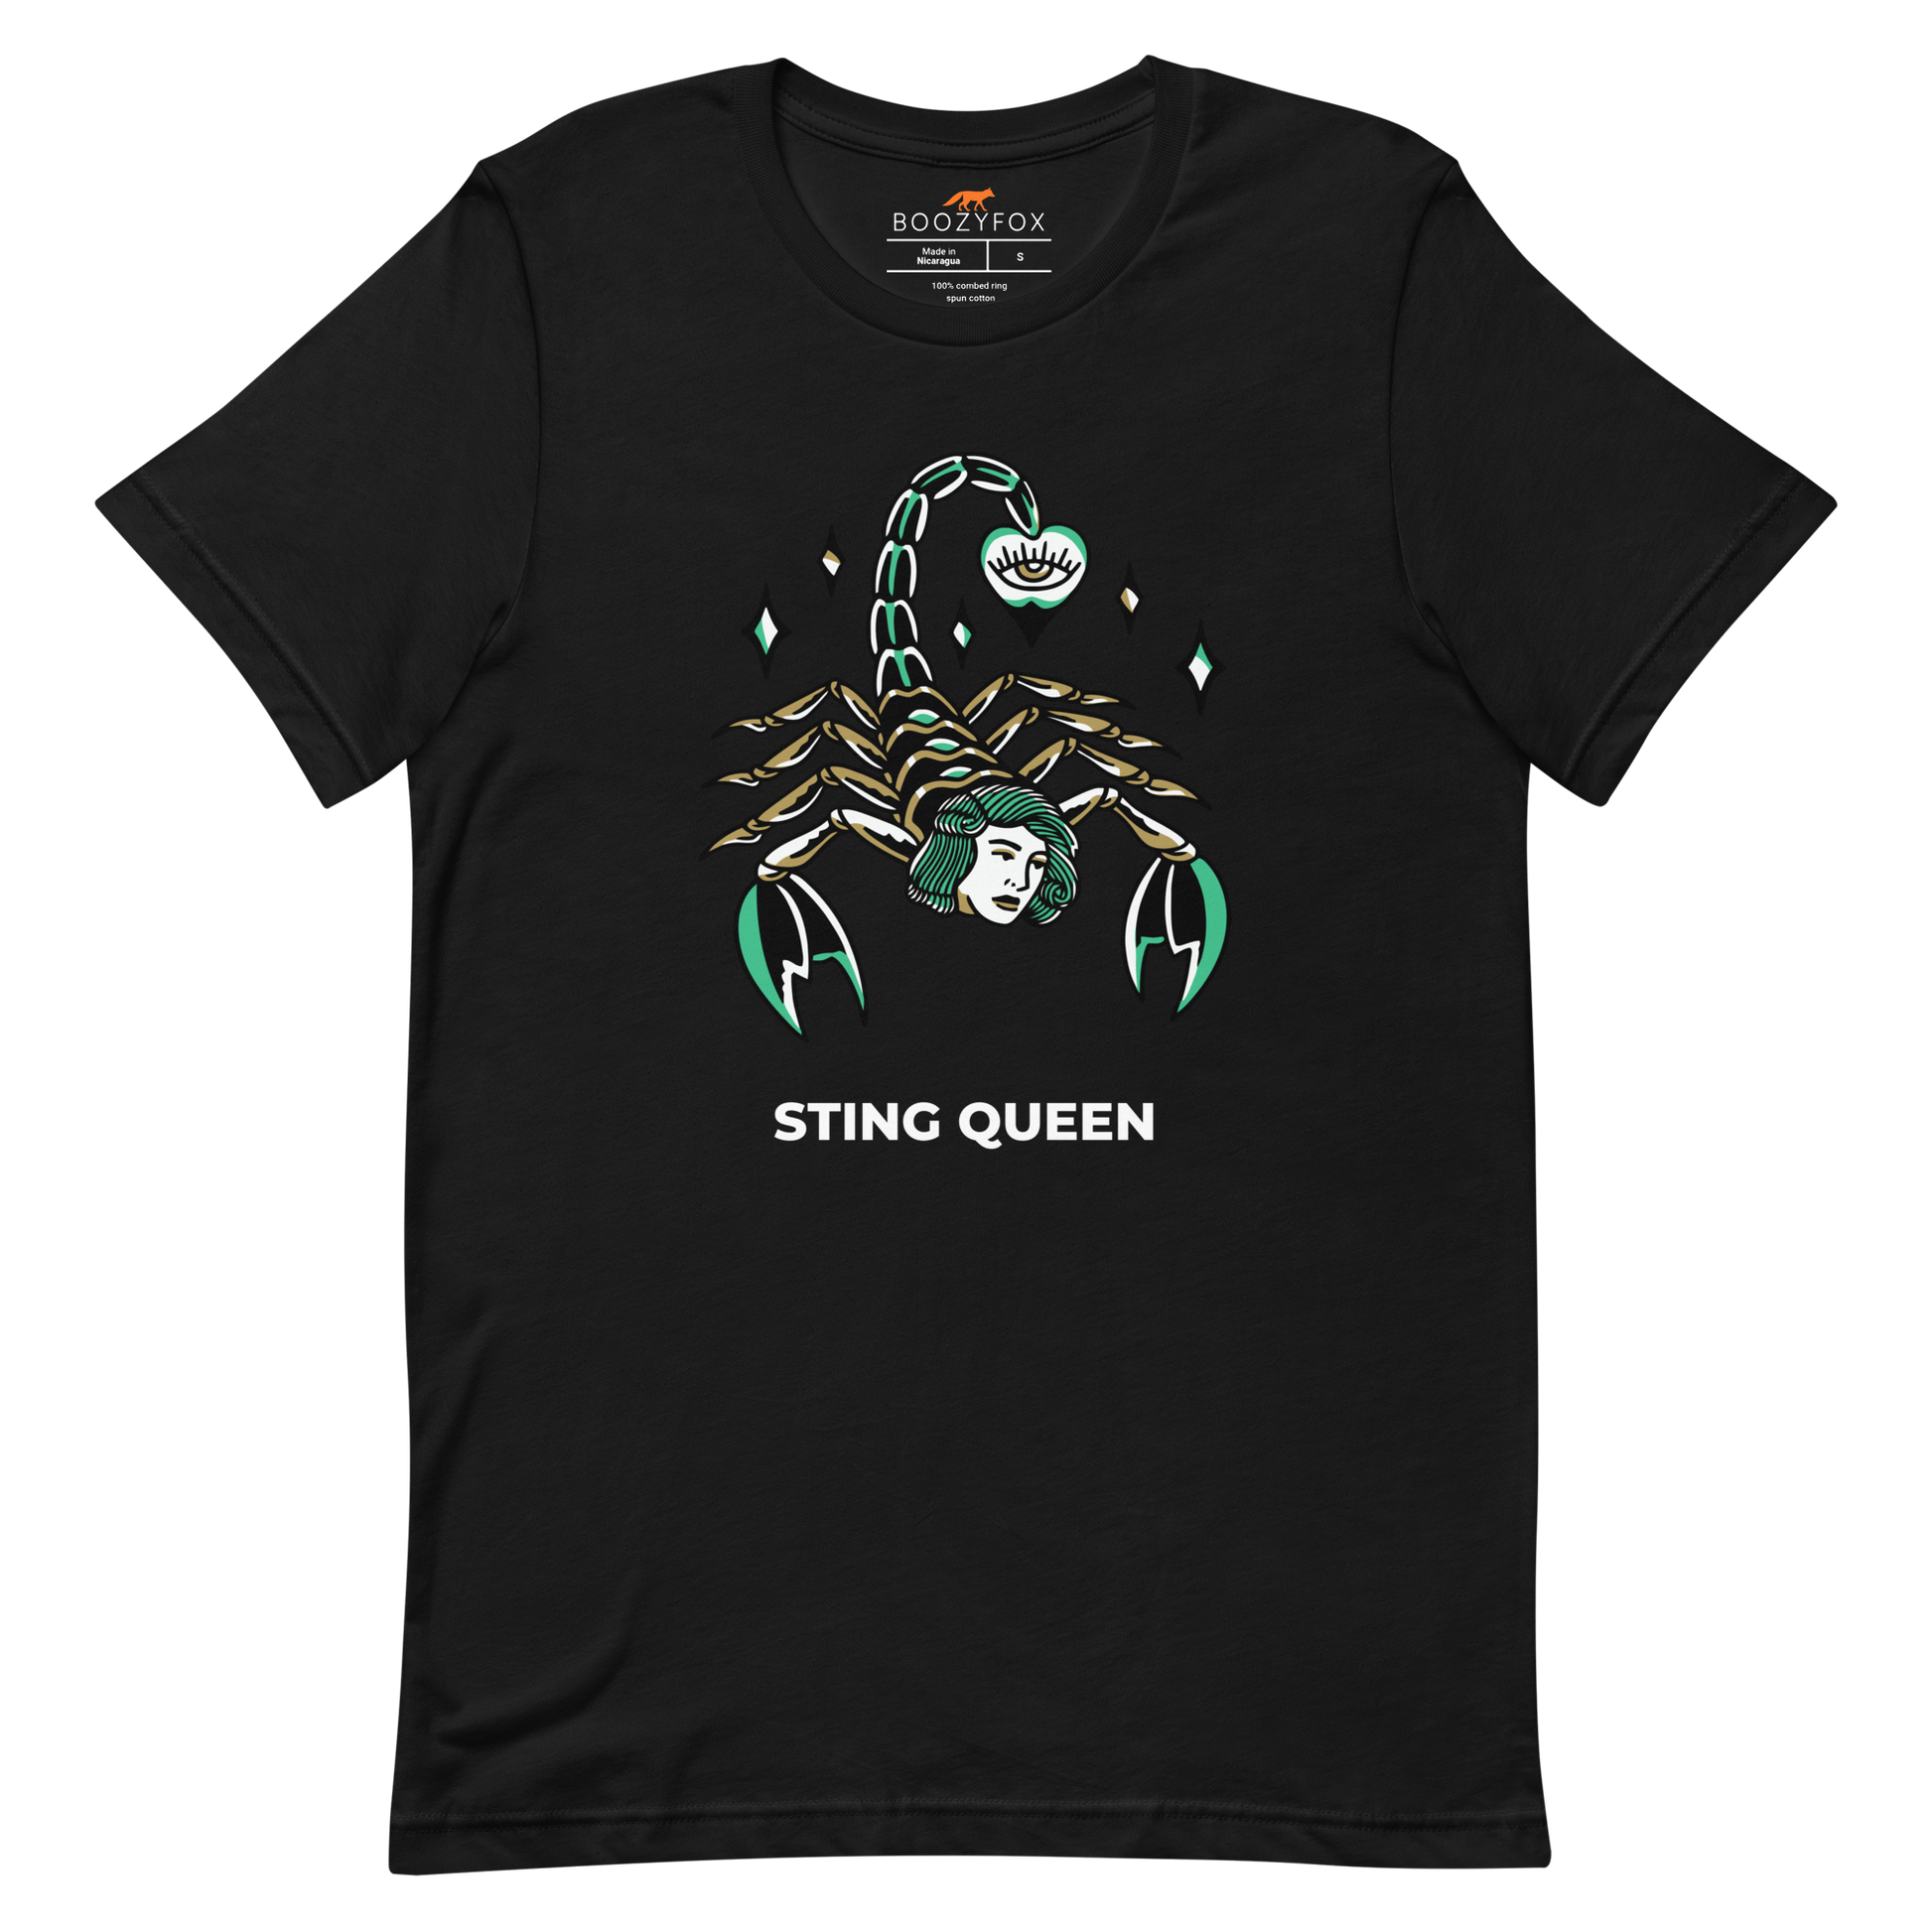 Black Premium Scorpion Tee featuring The Sting Queen graphic on the chest - Cool Graphic Scorpion Tees - Boozy Fox